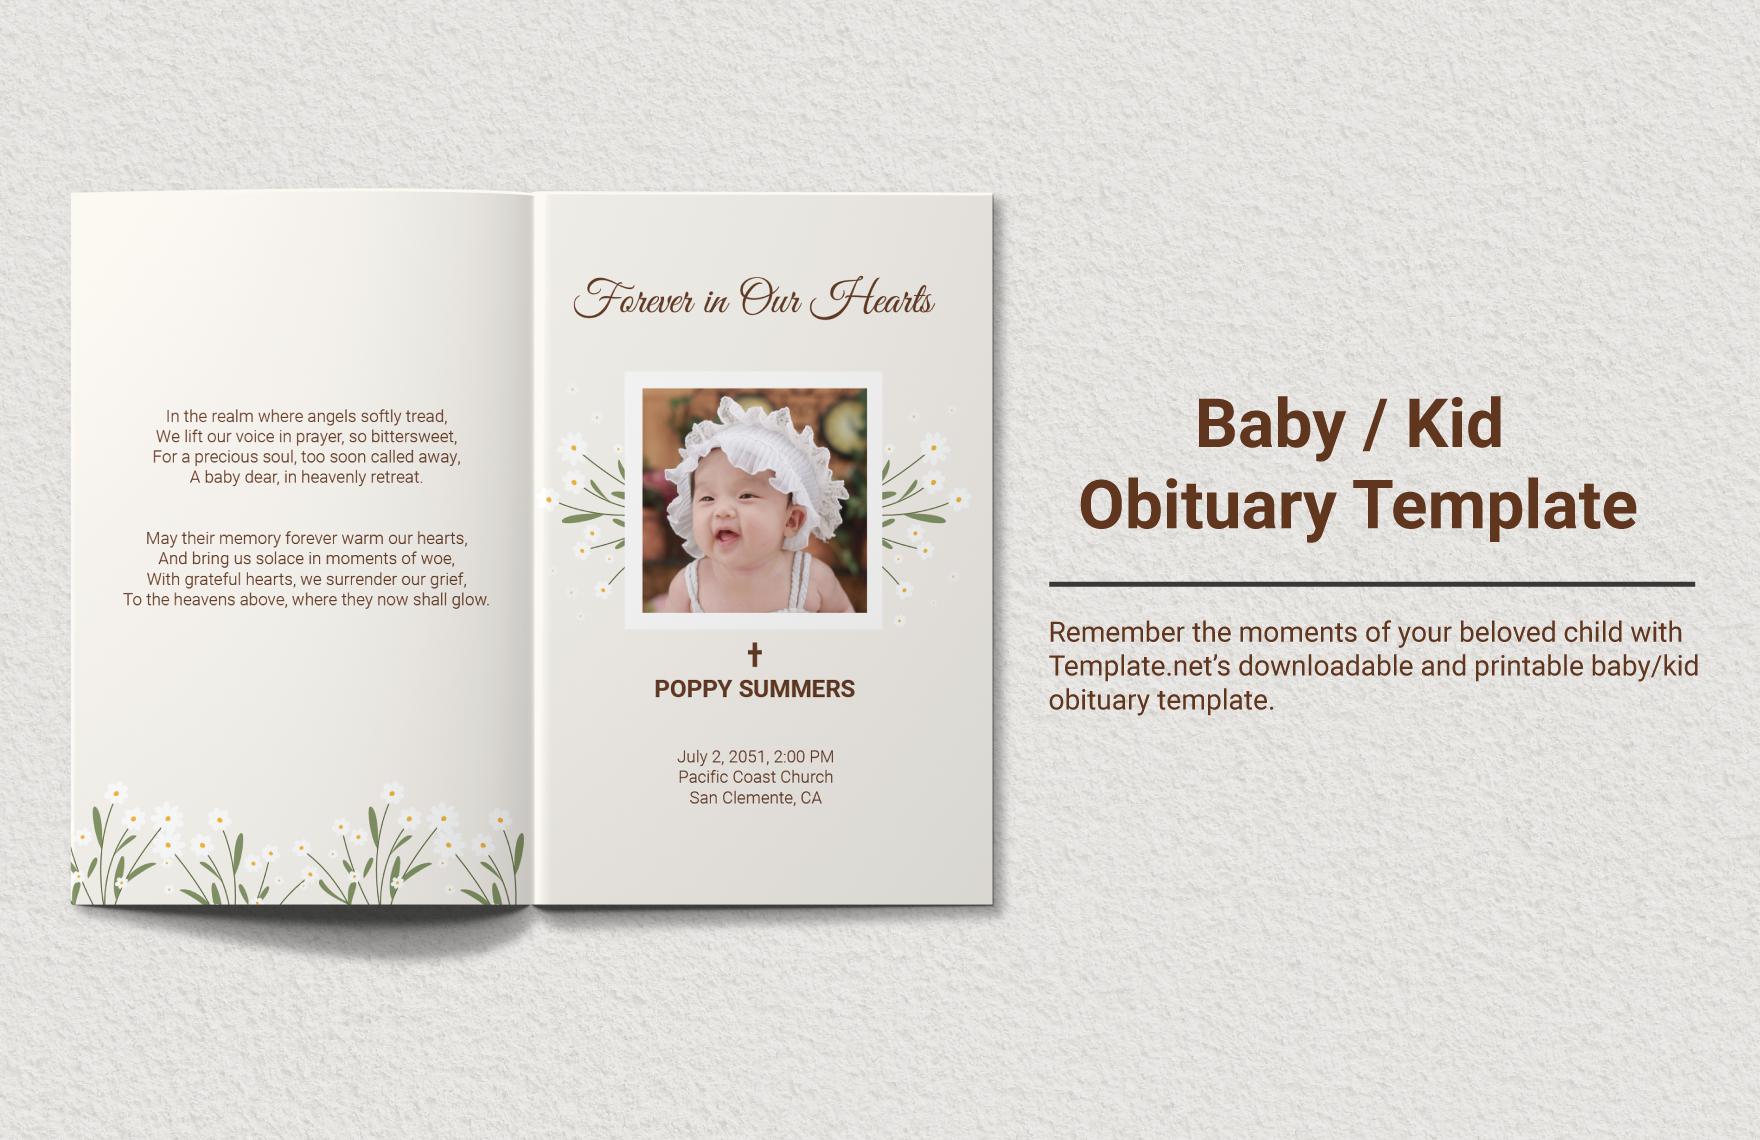 Baby / Kid Obituary Template